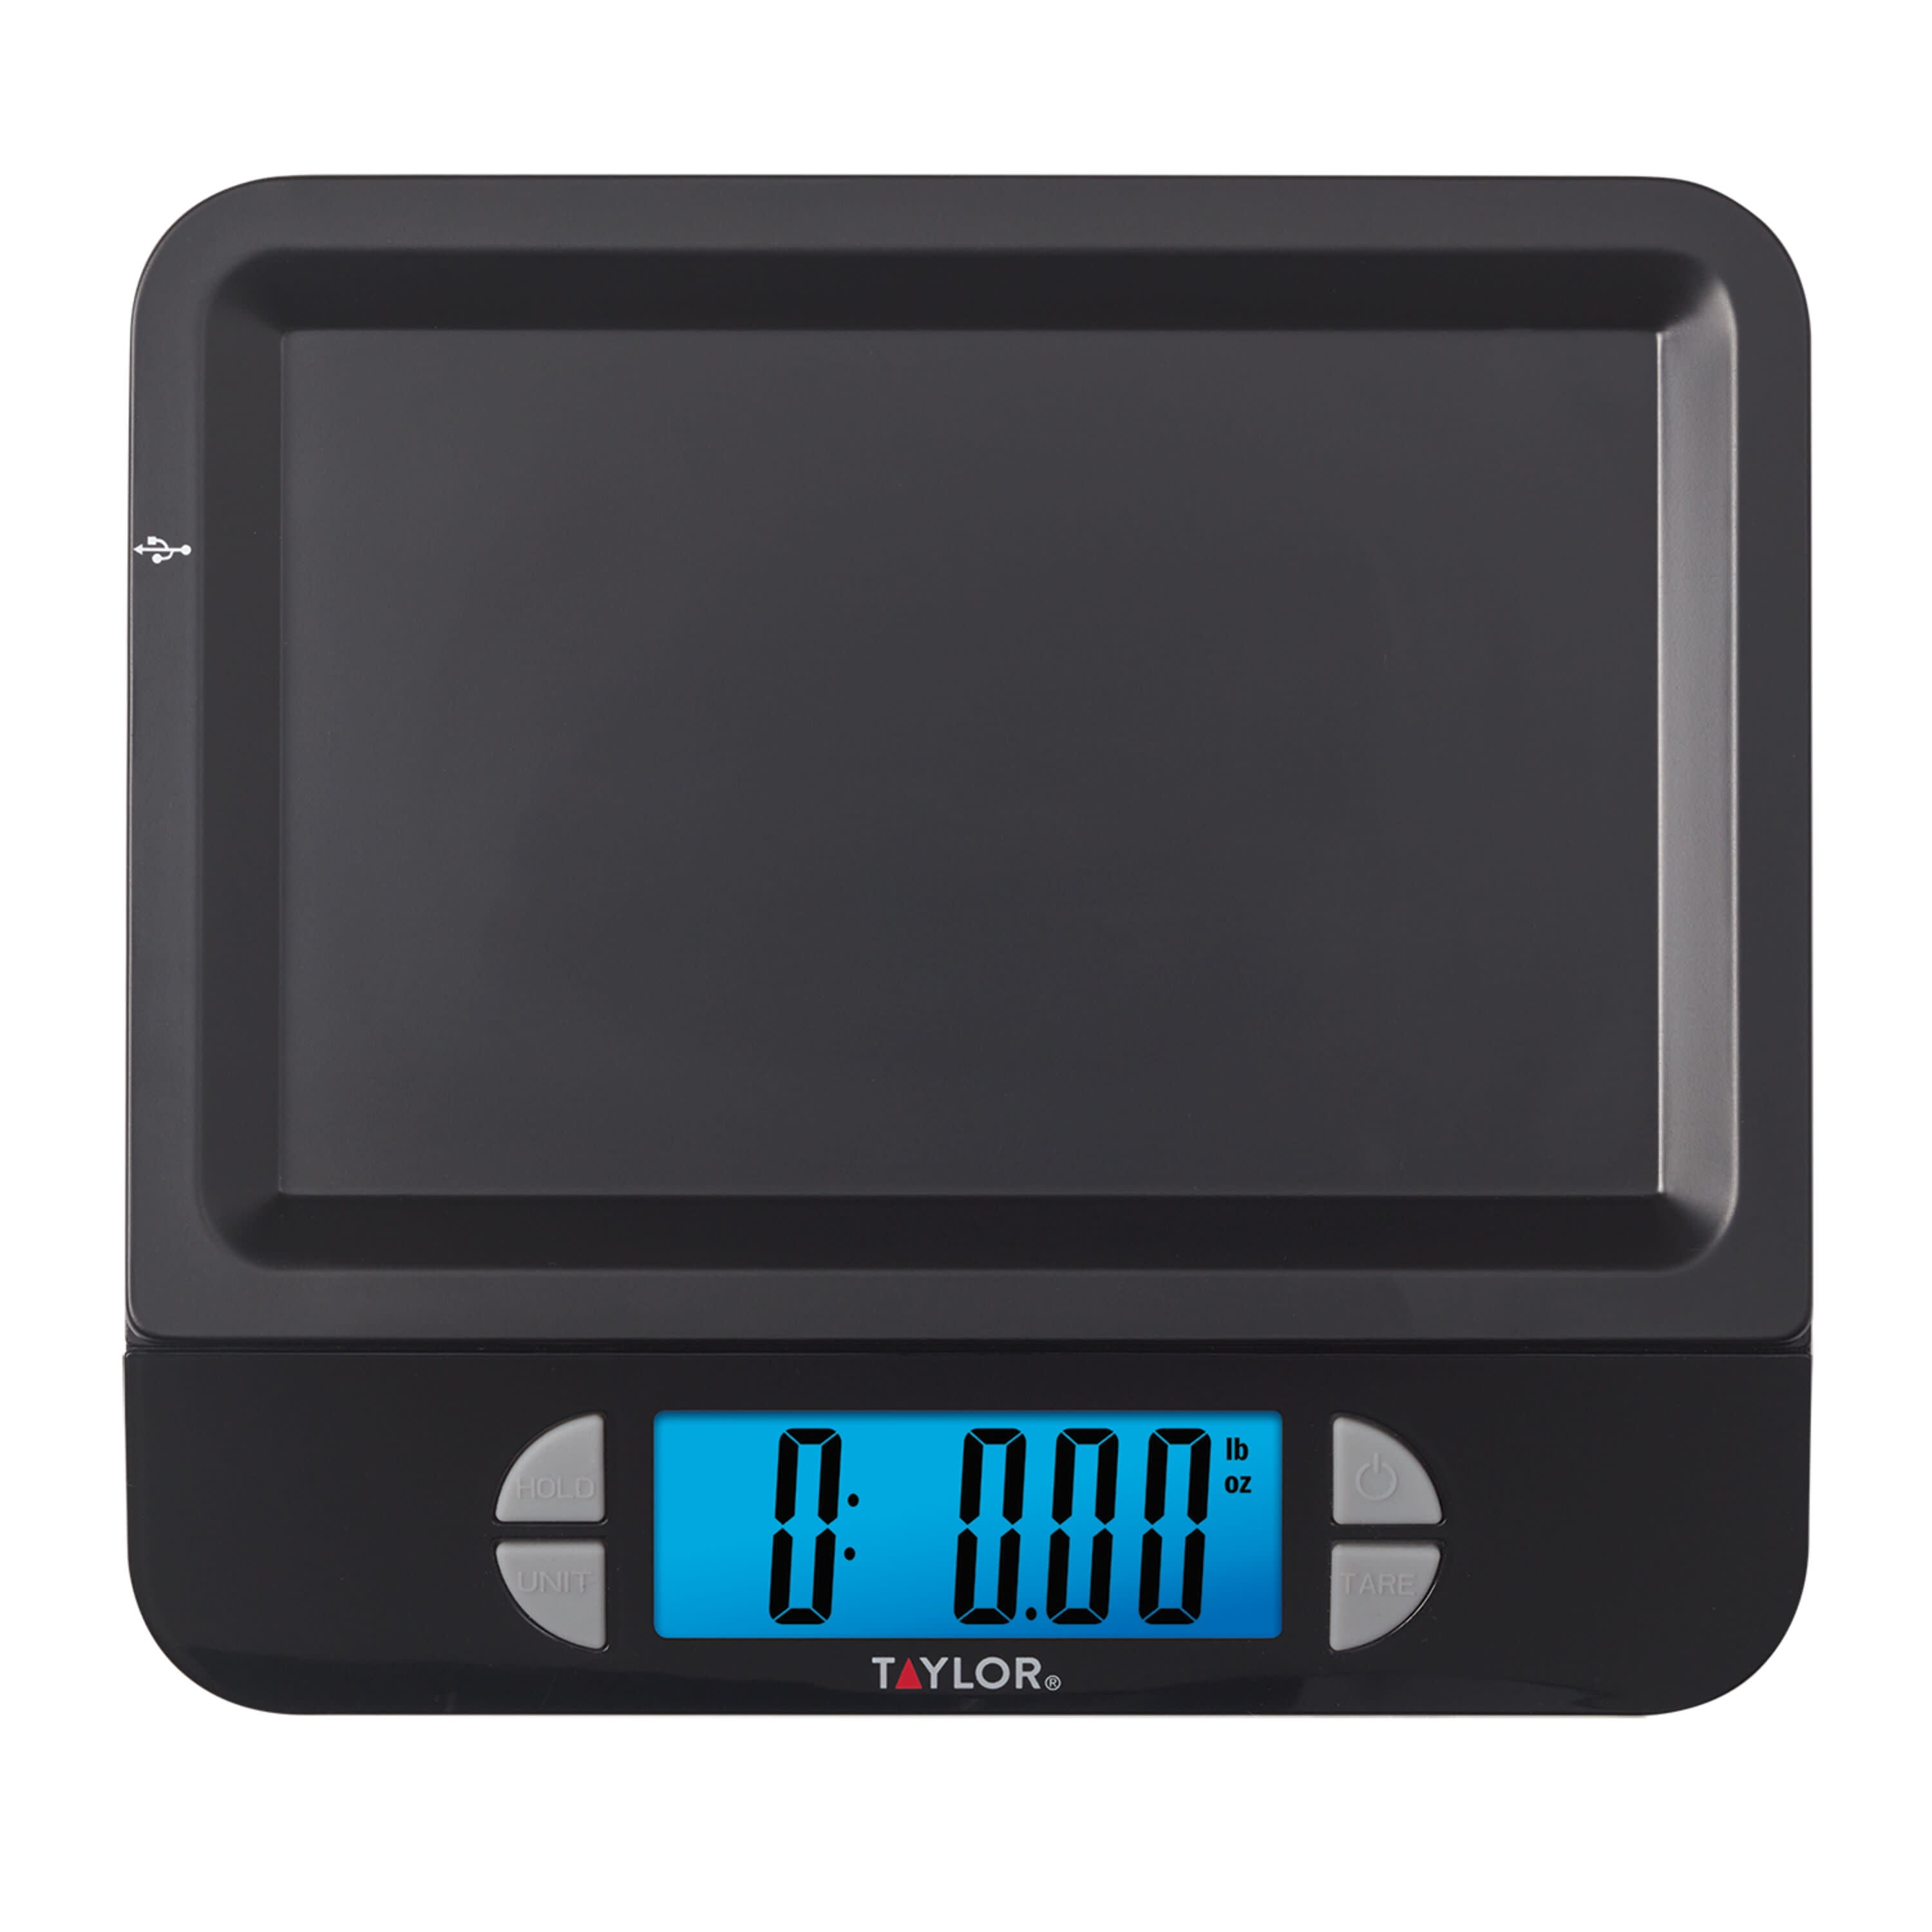 Taylor Precision Products TS50 Kitchen Scale 50lb for sale online 